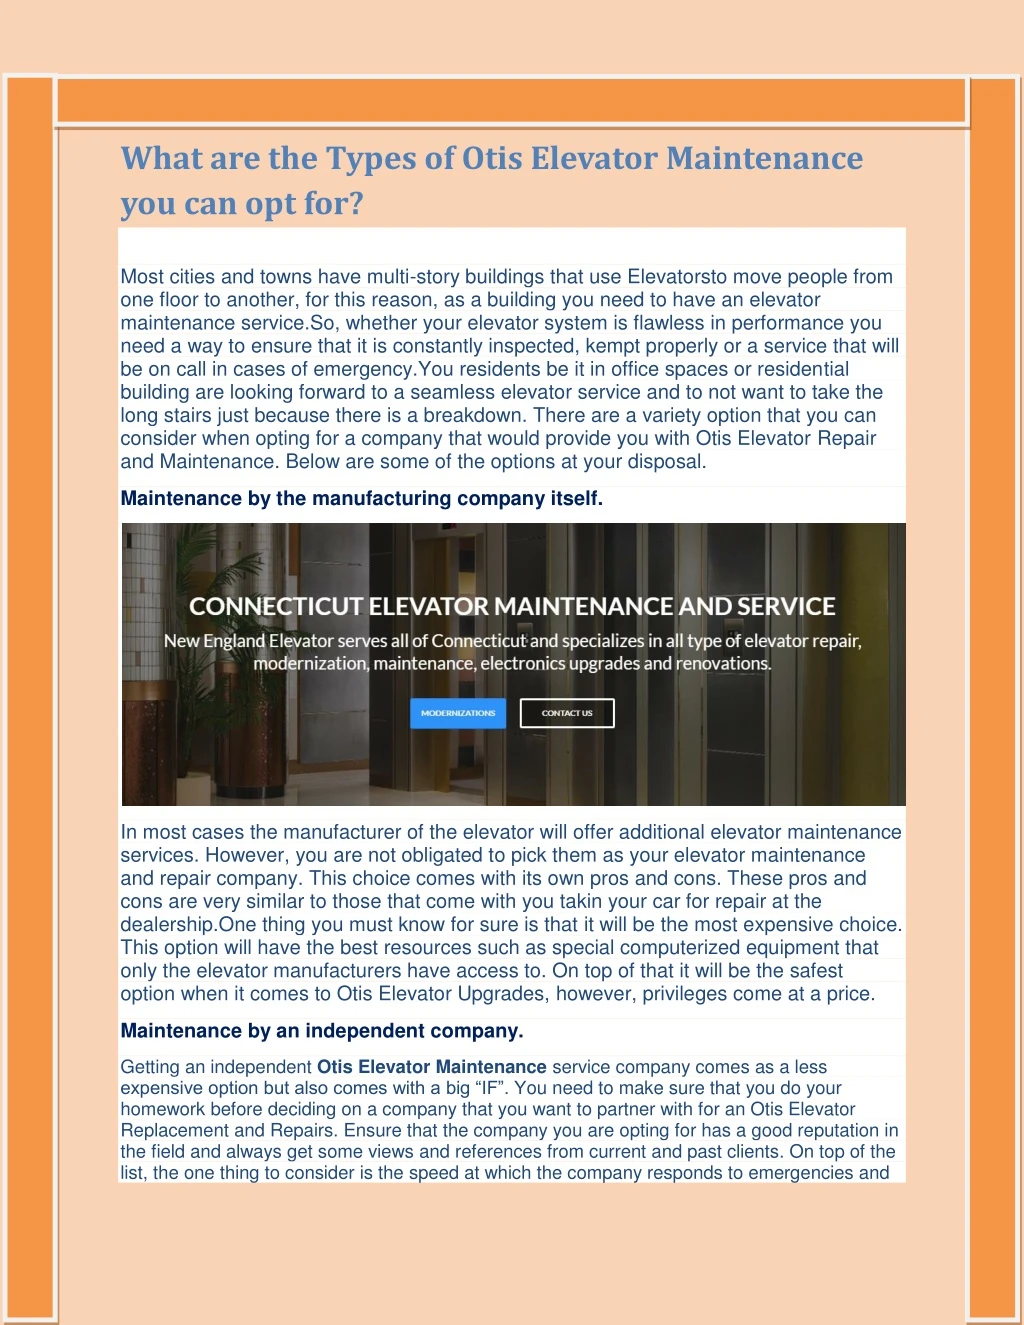 what are the types of otis elevator maintenance